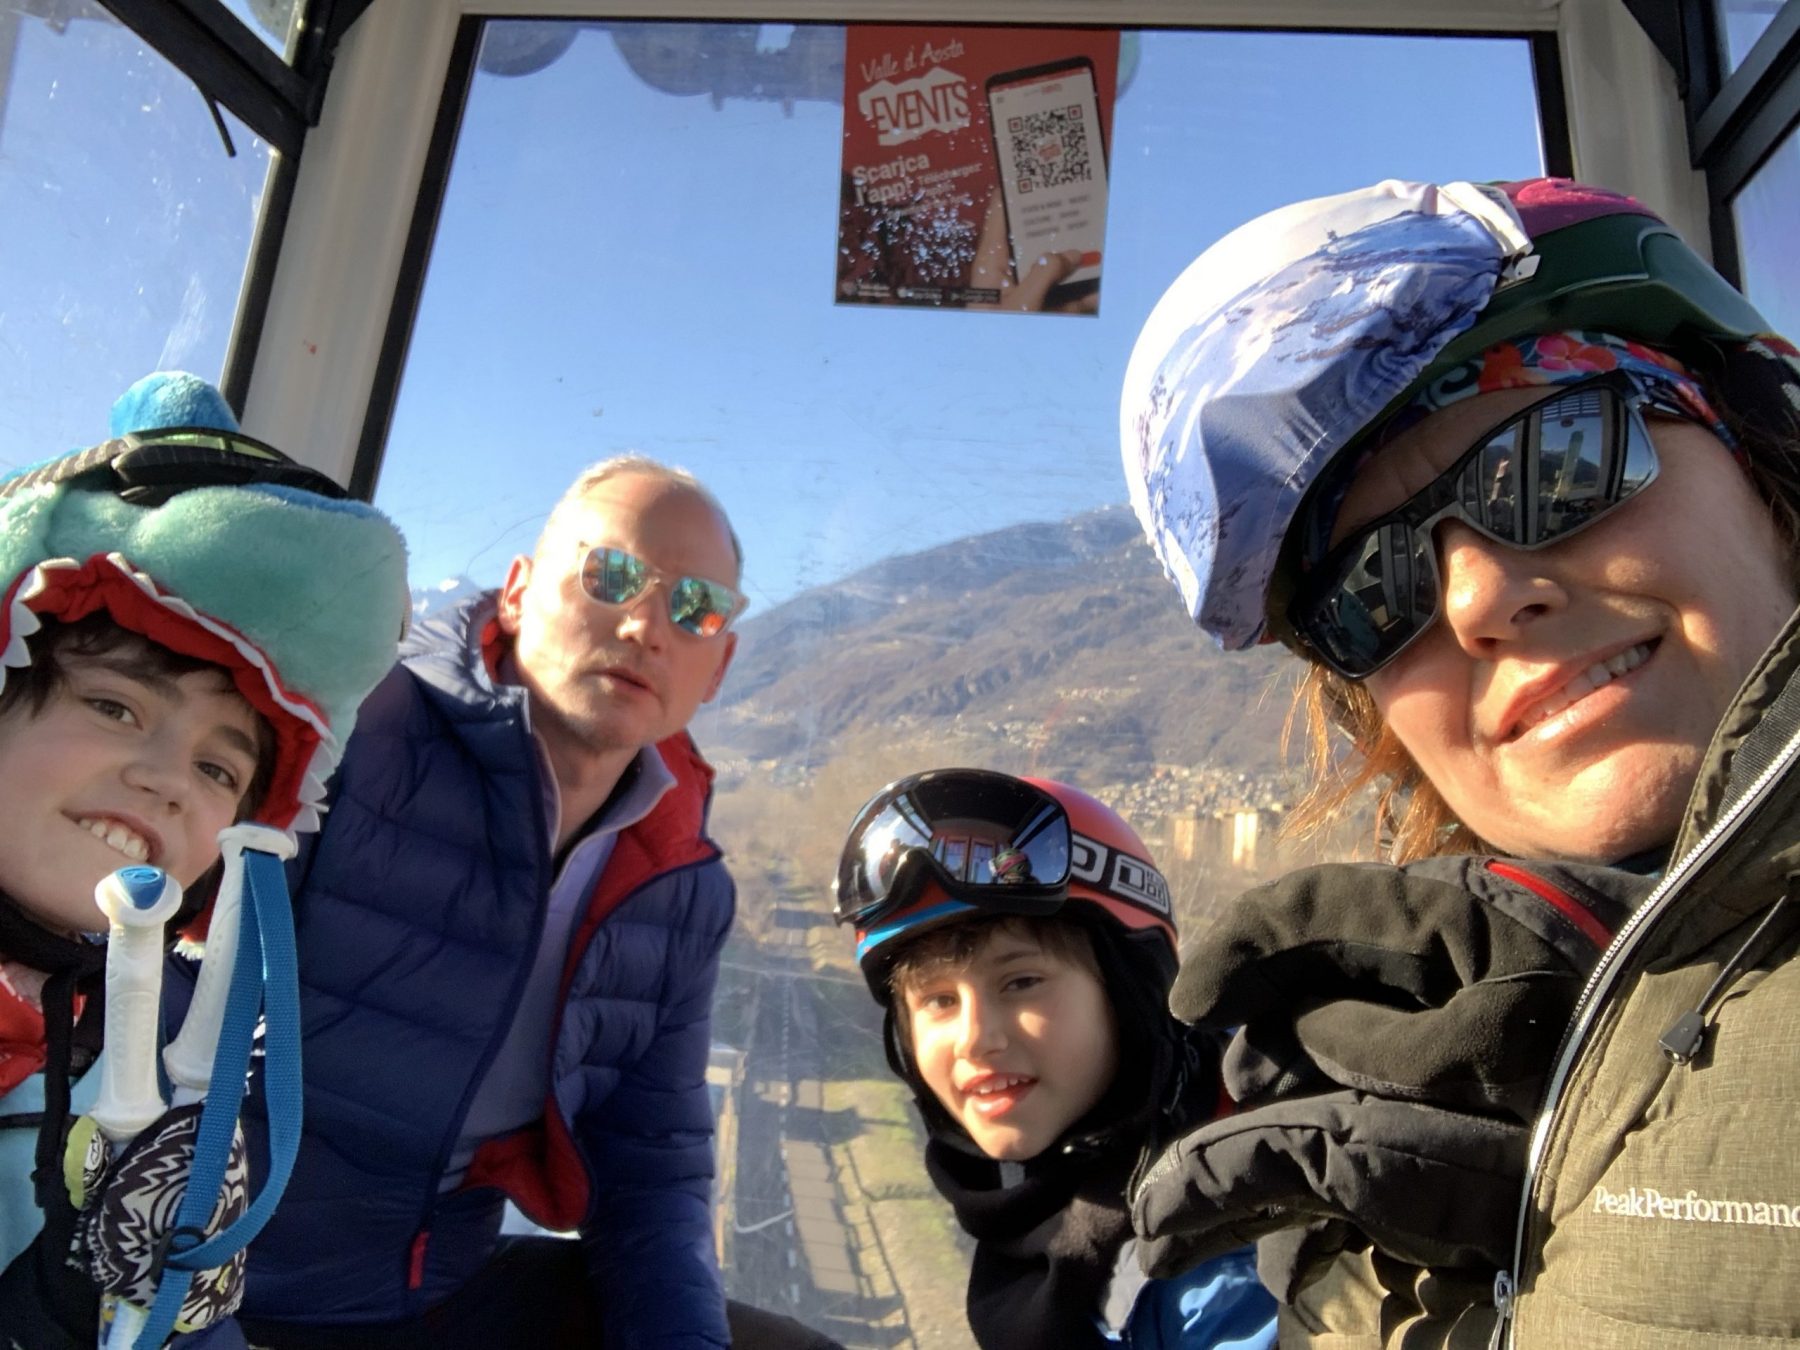 Going up the gondola in Pila on Christmas day. Our Christmas holidays in the mountains with the kids and our dog! Courmayeur, Aosta.